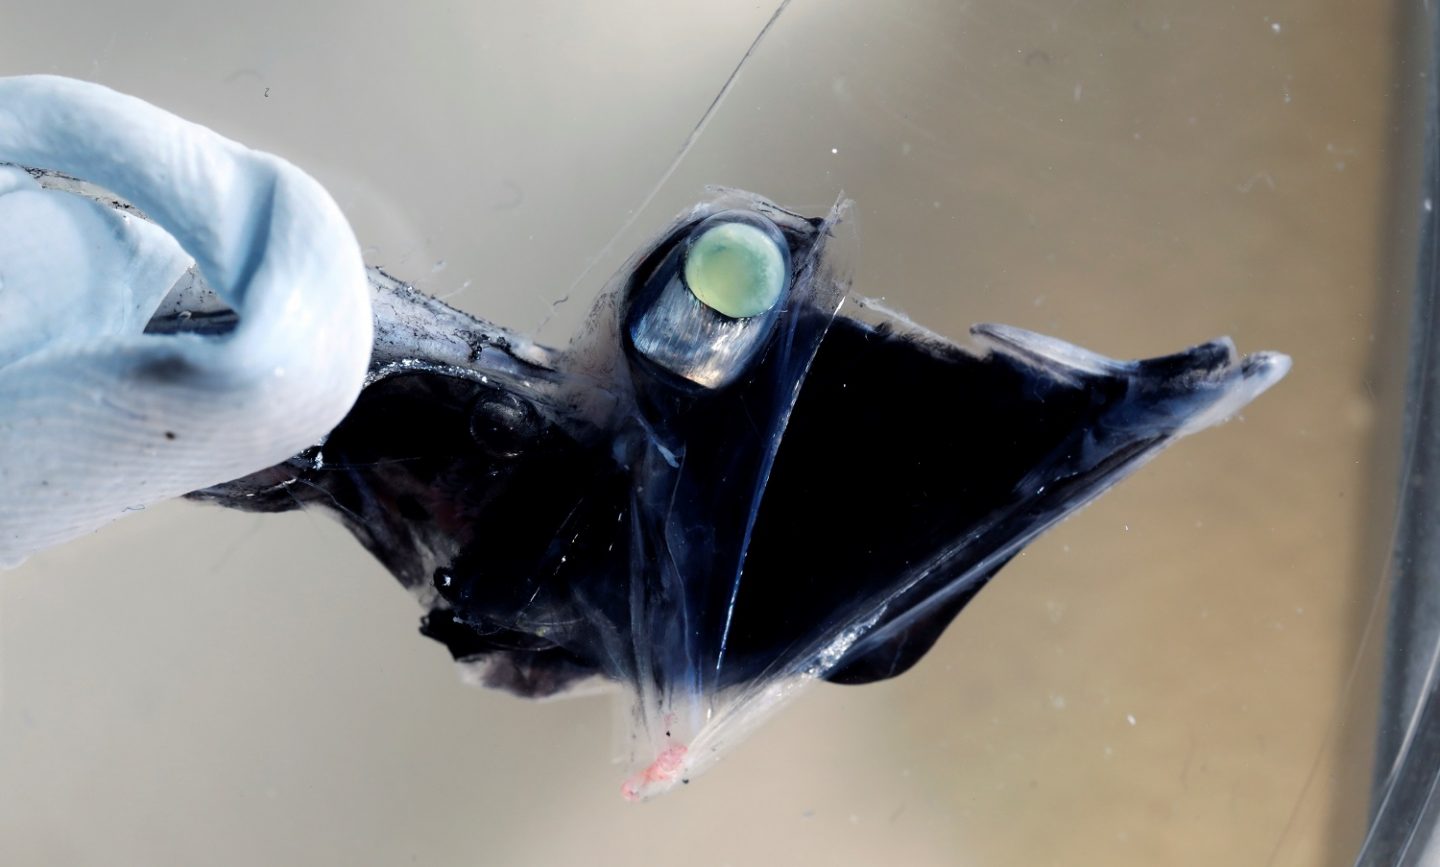 The tub-eye fish (Stylephorus chordatus) was found to use five different rod opsins within its eyes. The long cylindrical shape of the eyes increases light capture and also enables the fish to move them from a horizontal to a vertical position. 